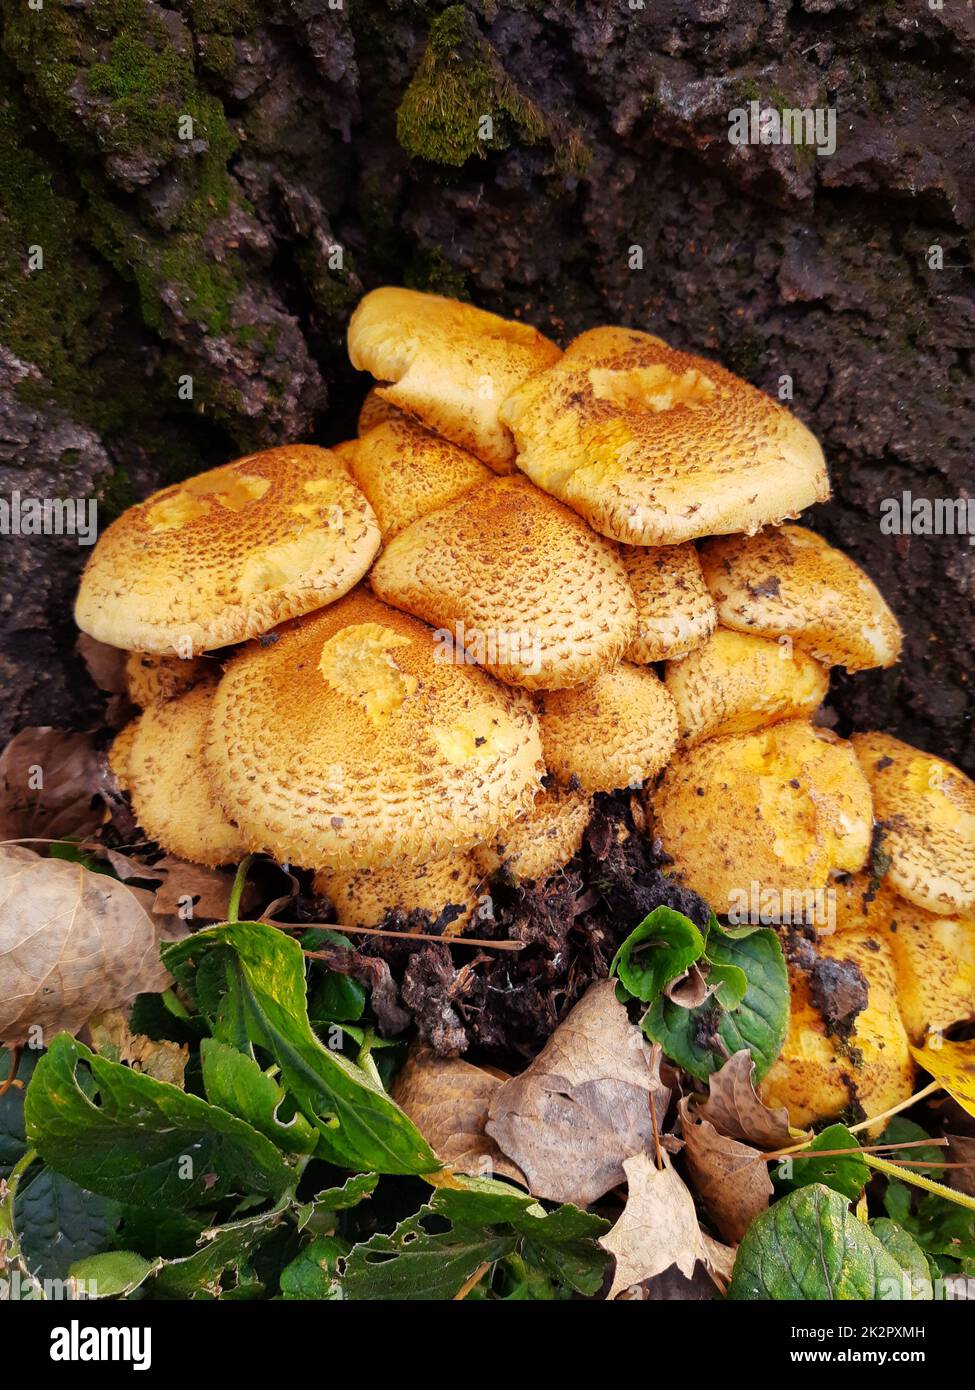 Common scaly fungus on a tree trunk Stock Photo